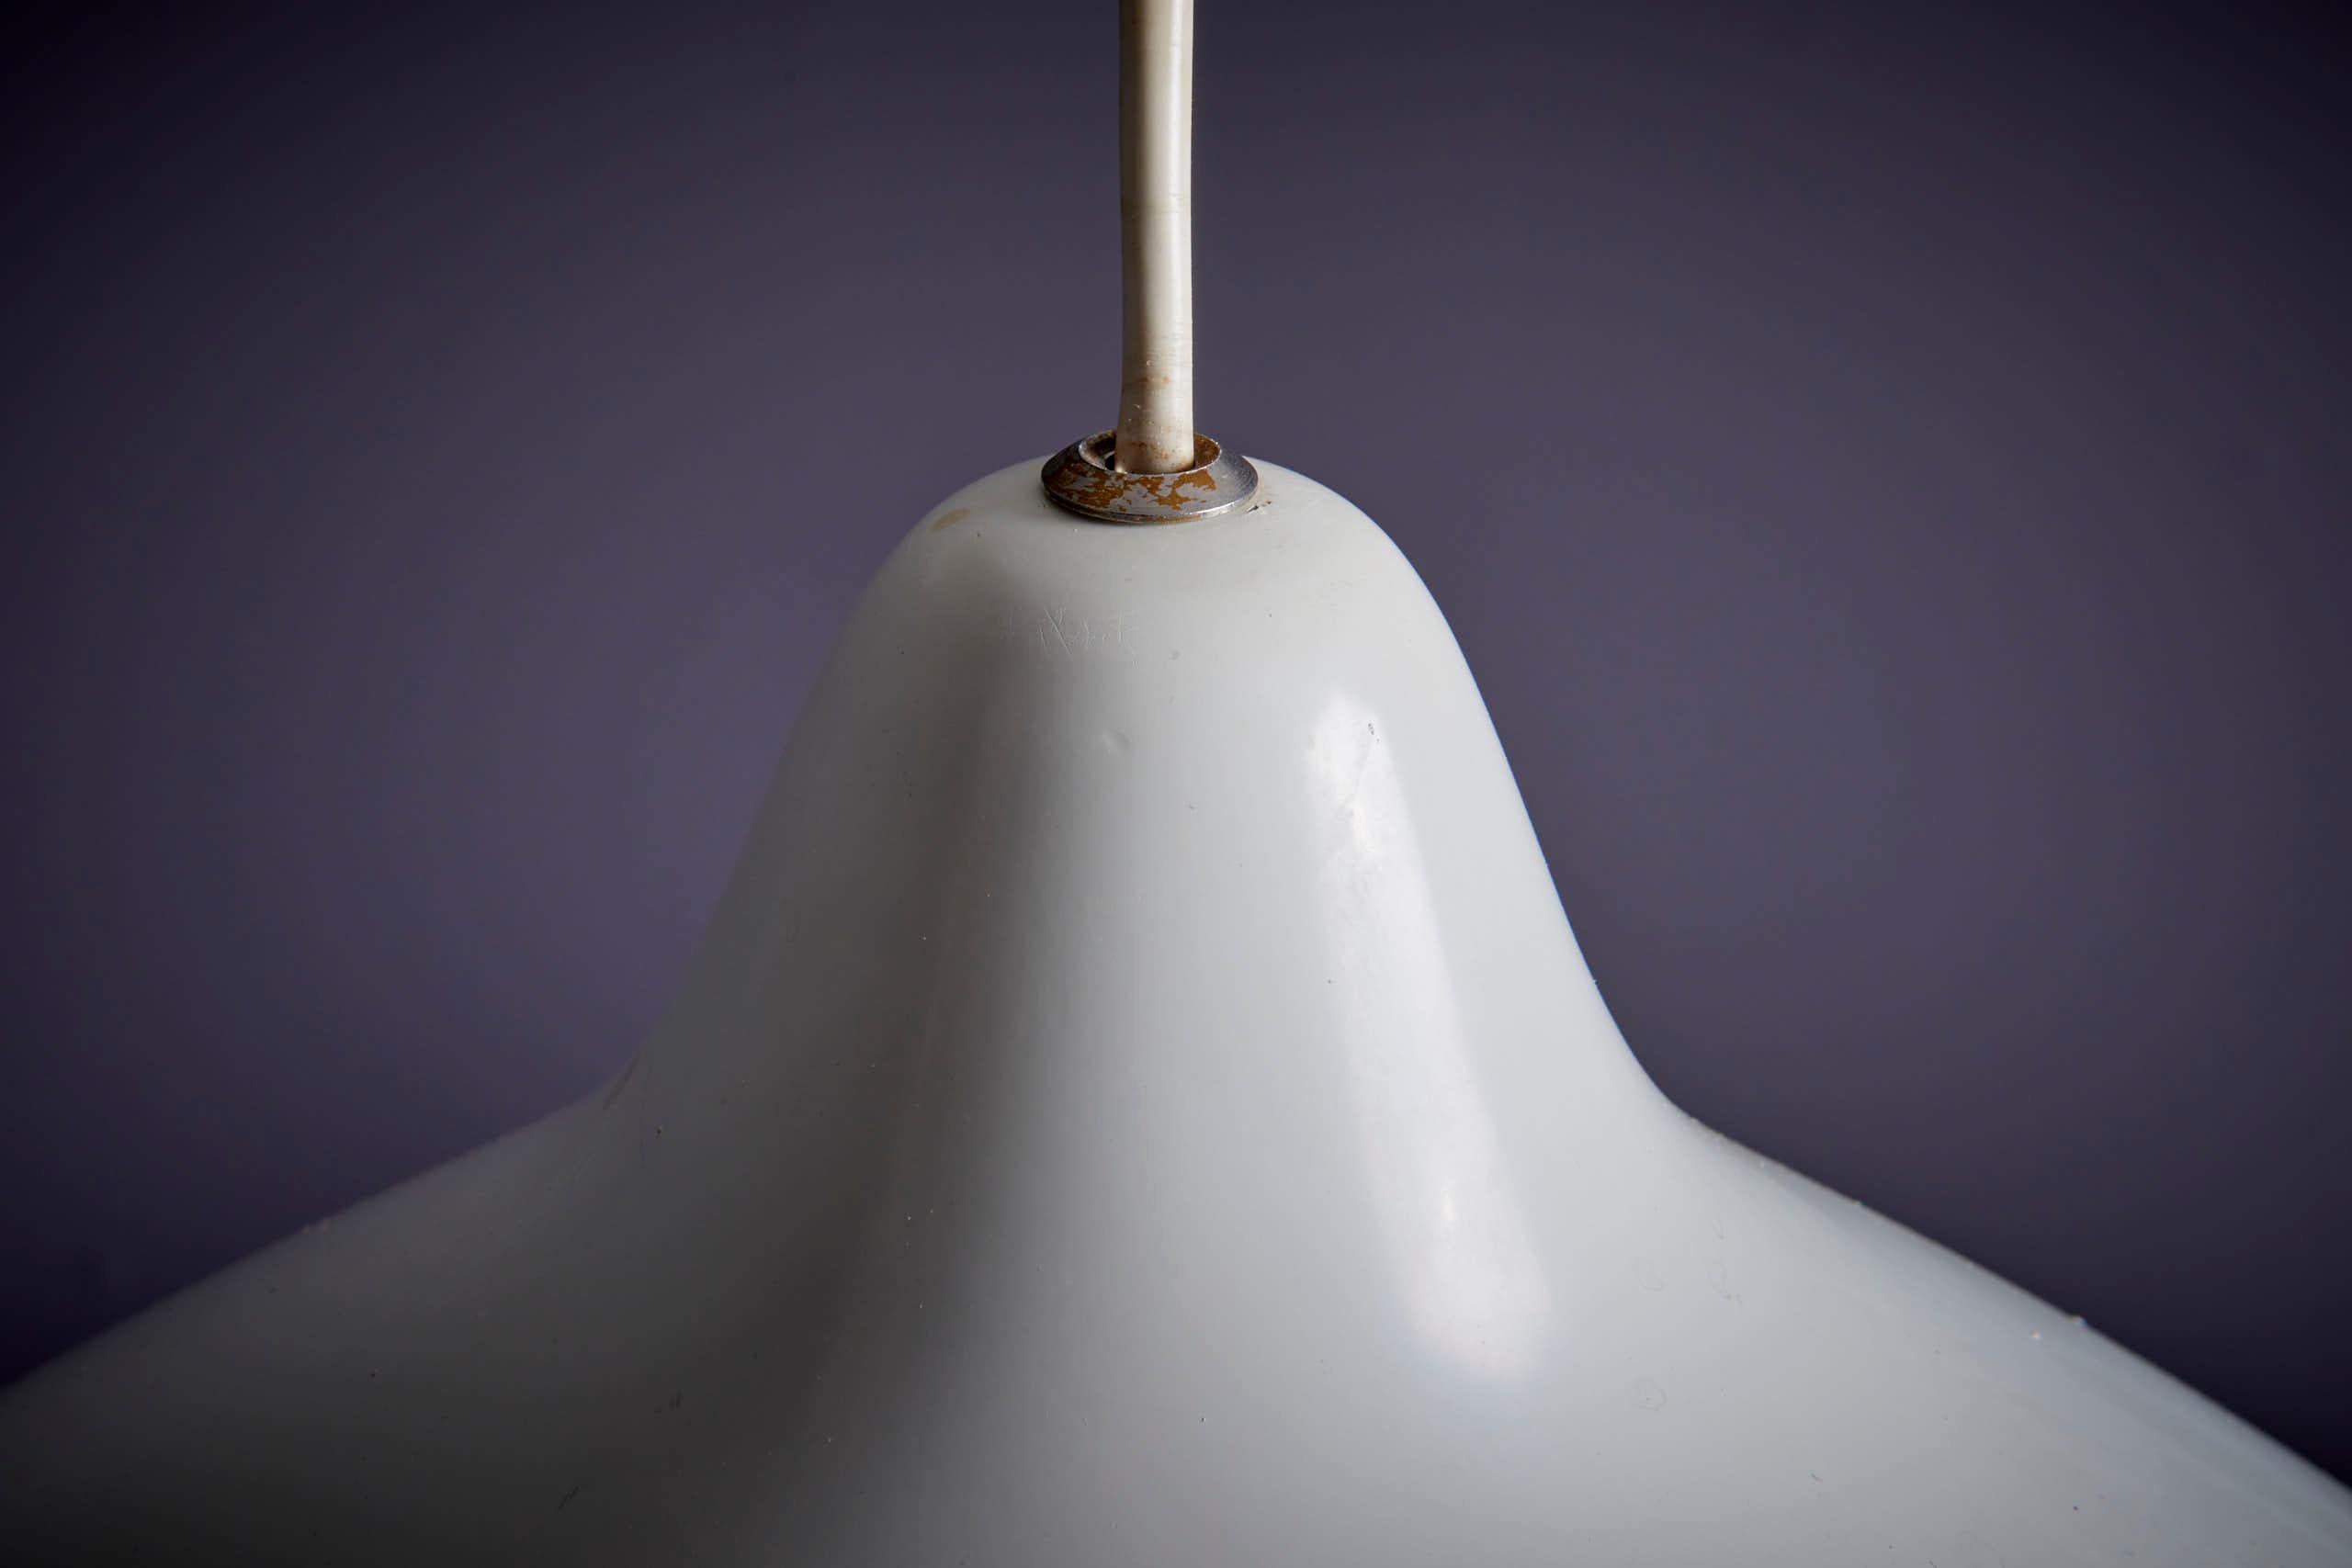 Lisa Johansson-Pape White Pendant Lamp in Aluminum, Finland 1960s. Lisa Johansson-Pape, a Finnish designer (1907-1989), is celebrated for her iconic Mid-20th-century lighting fixtures. Her designs, known for clean lines and timeless appeal, include